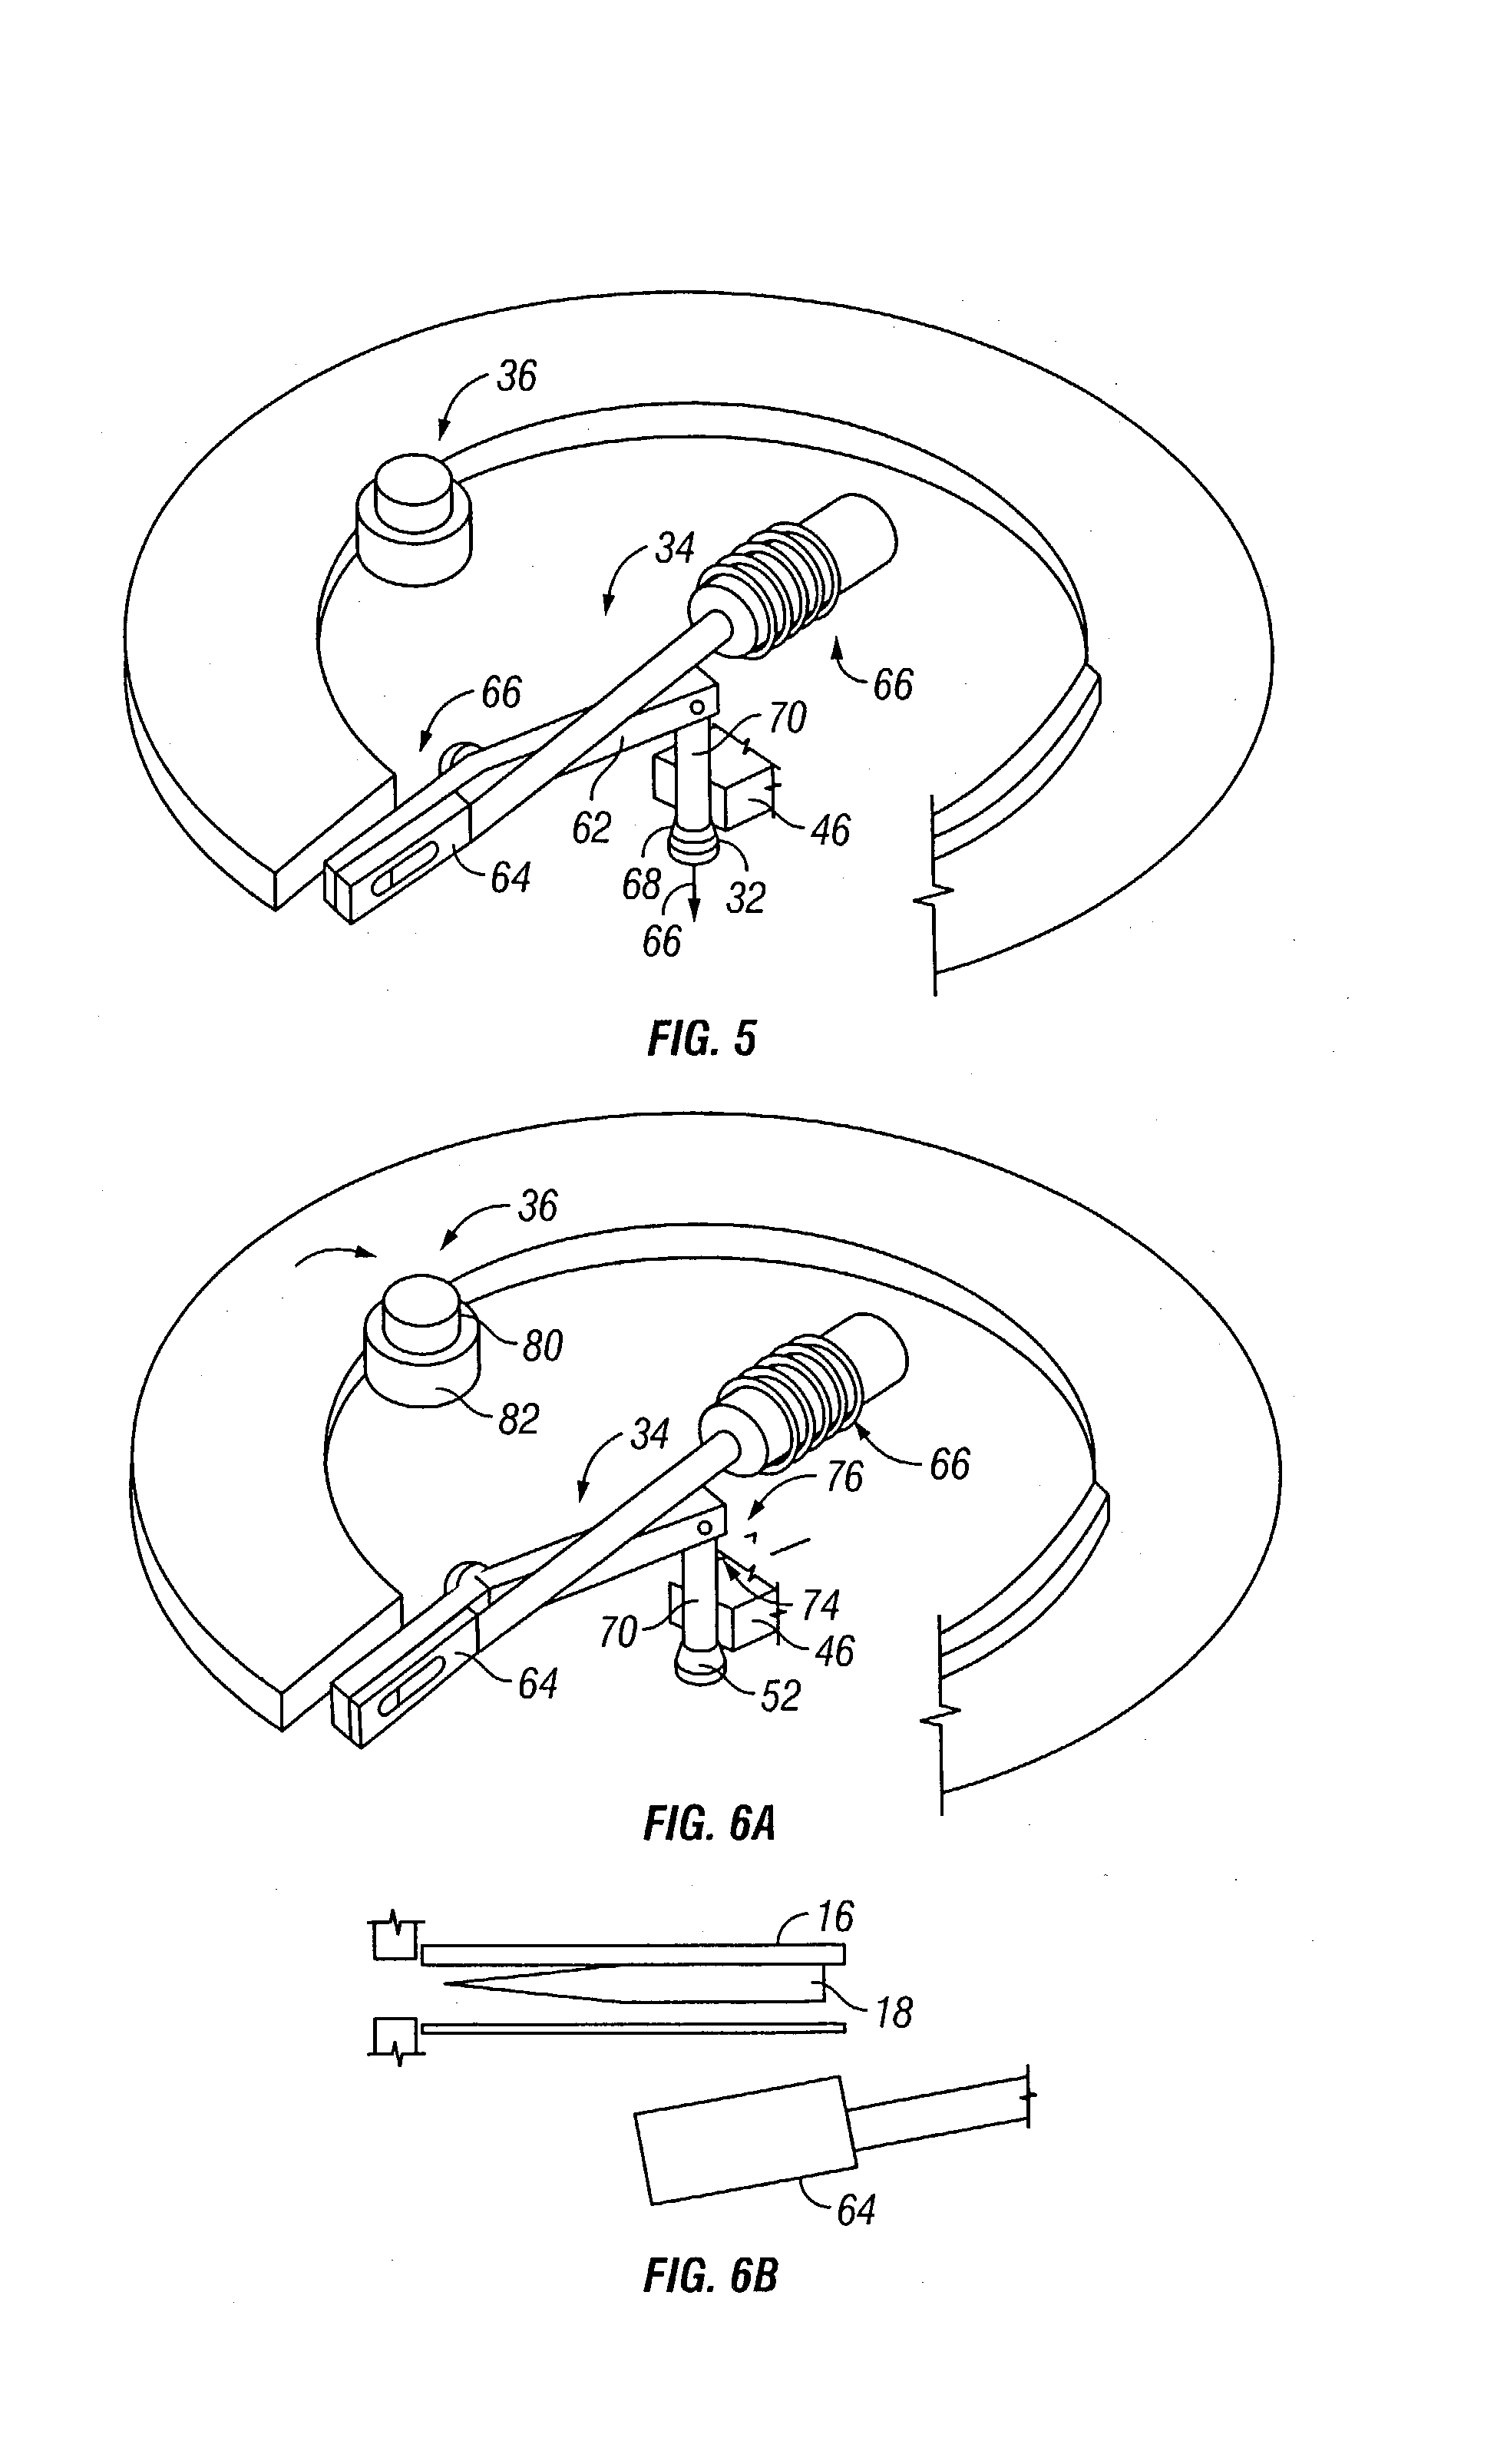 Method and apparatus for a multi-use body fluid sampling device with analyte sensing